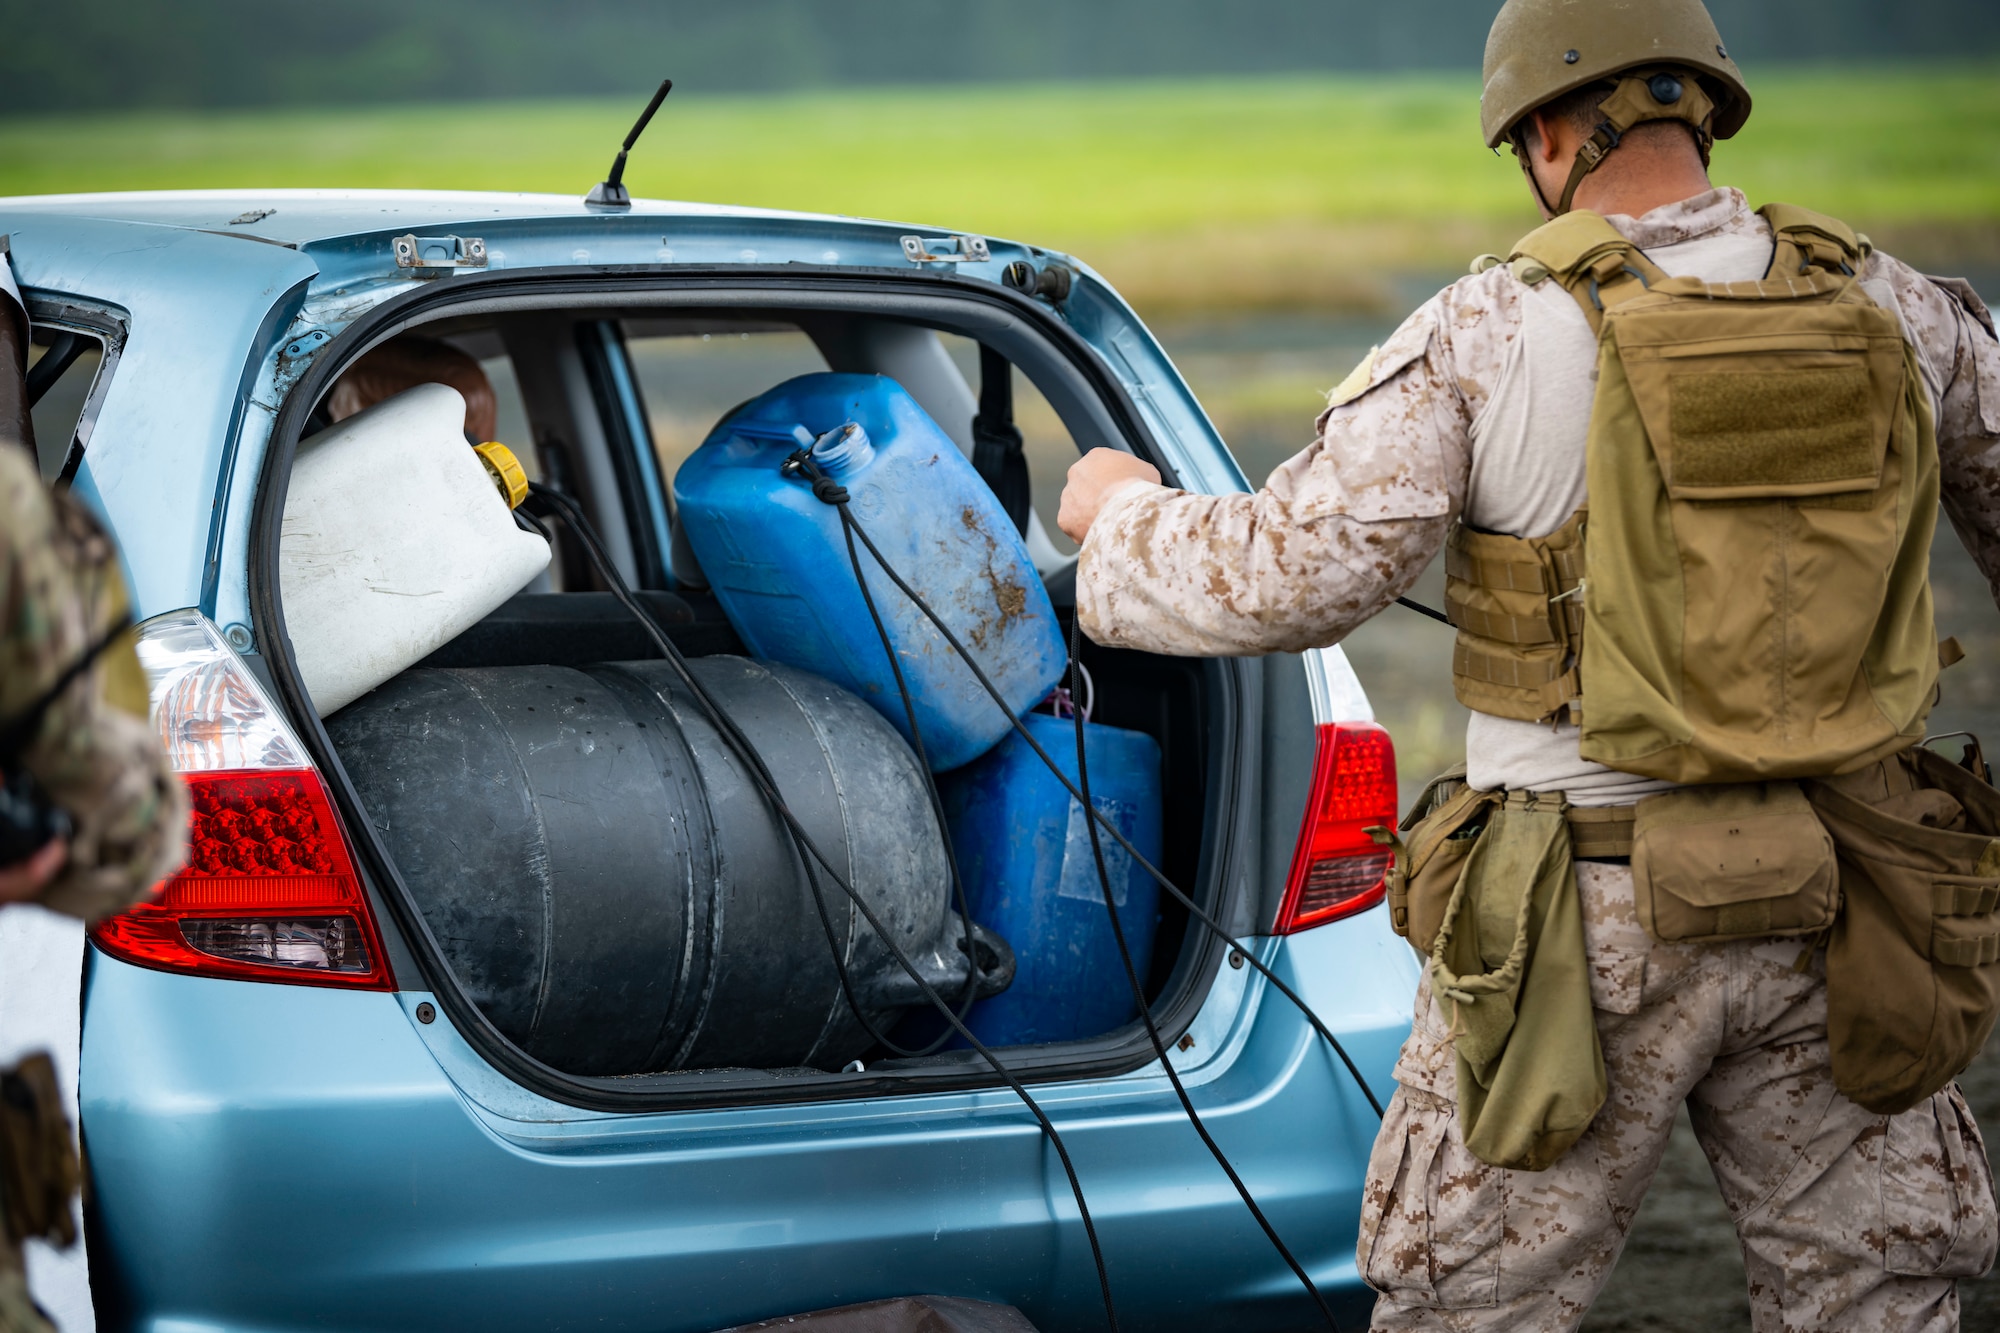 U.S. military member in tactical gear ties cables around multiple explosive ordnance in the trunk of a car.